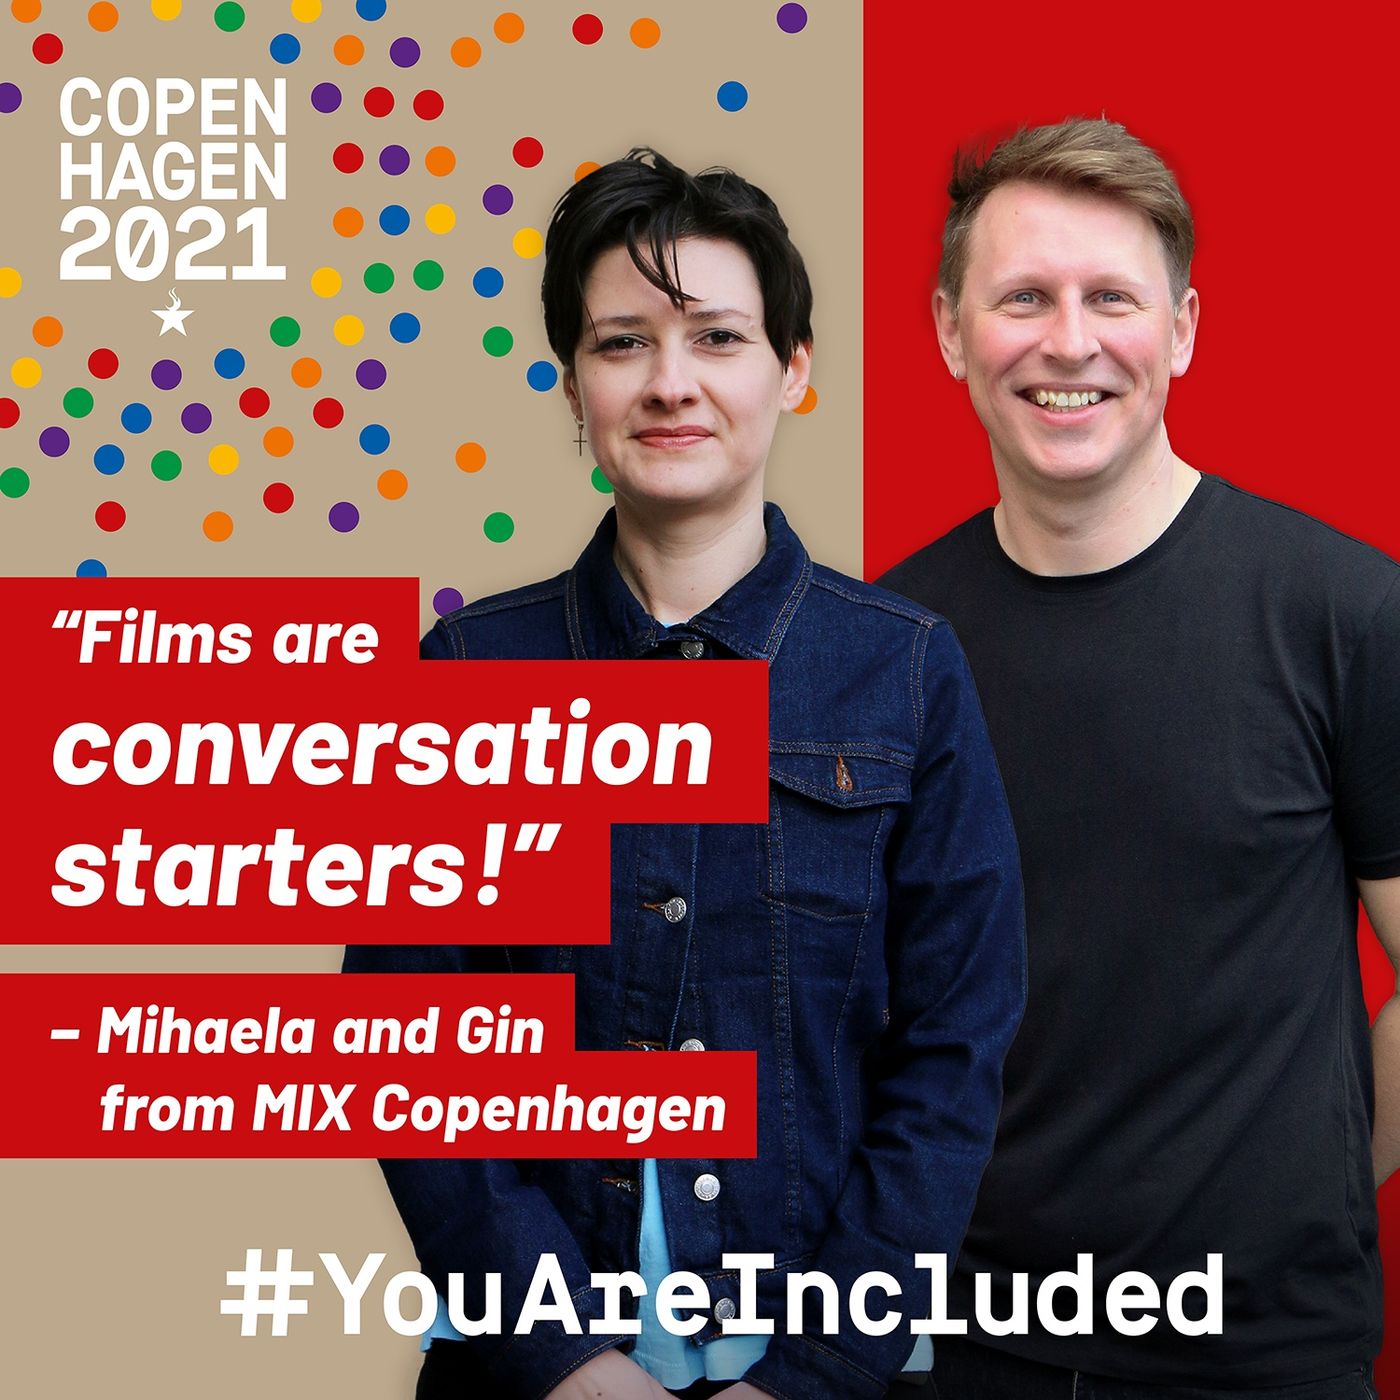 26. "Films are conversation starters!" - Mihaela and Gin from MIX Copenhagen